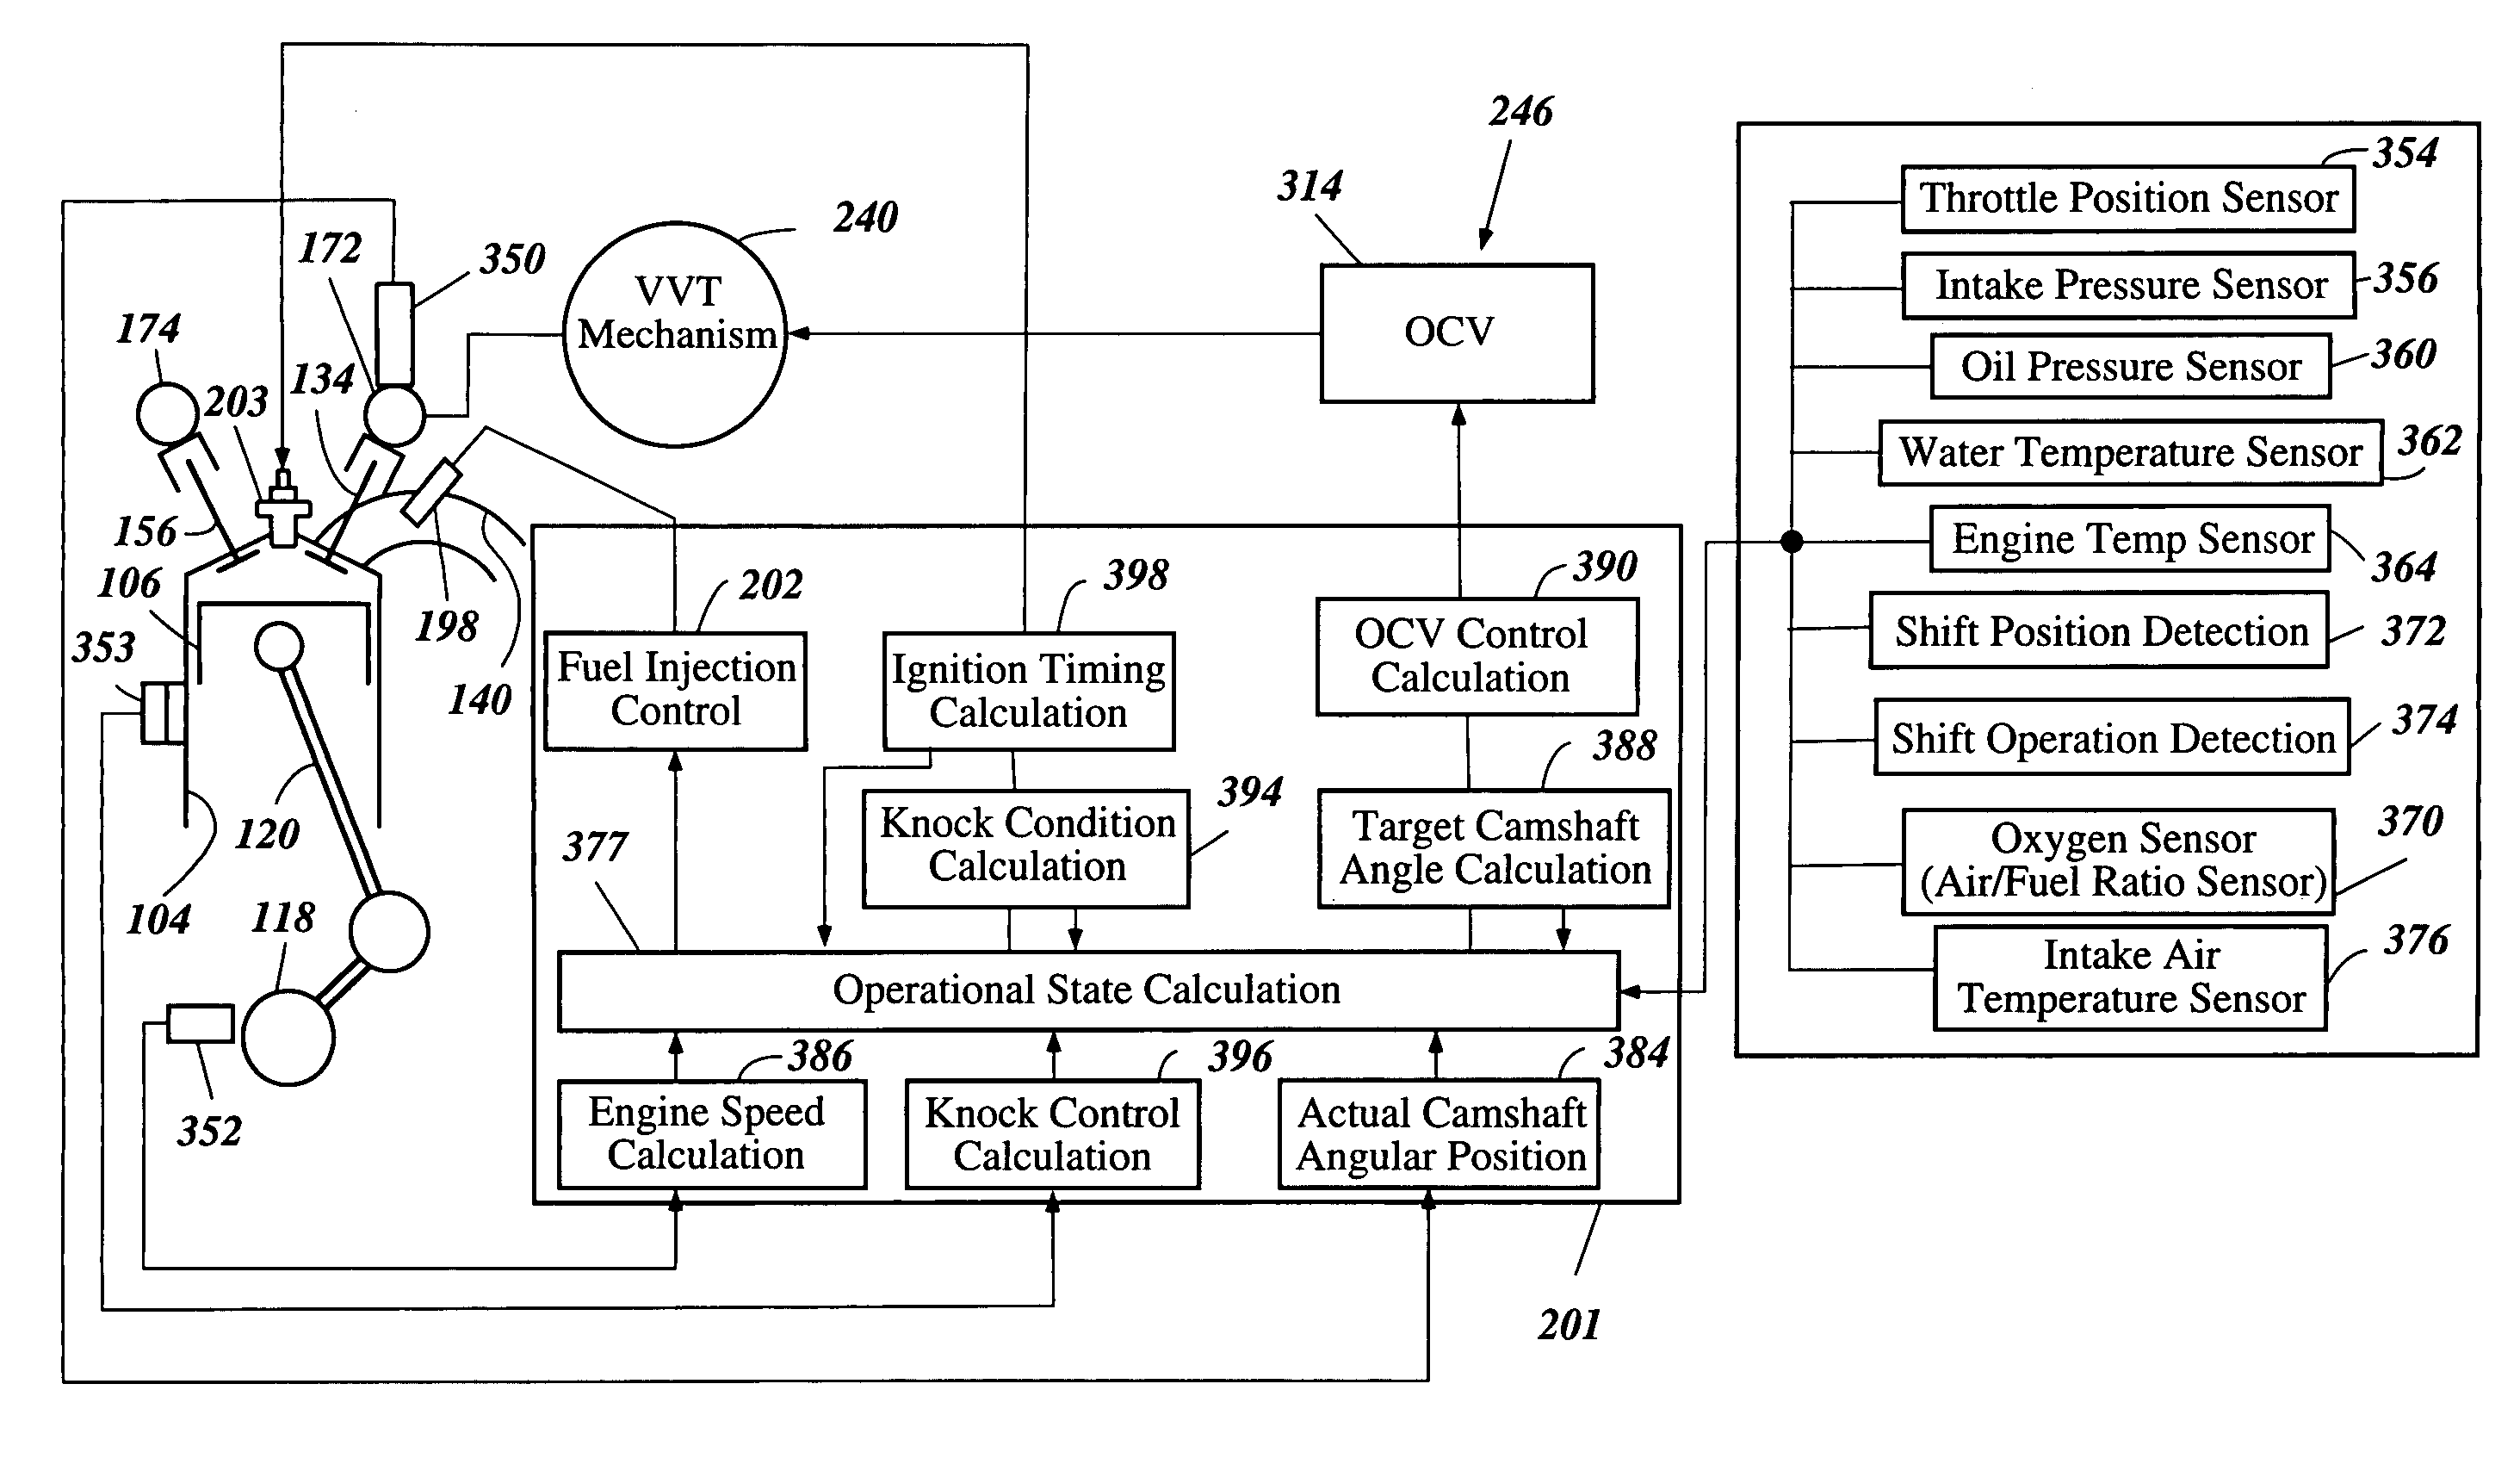 Knocking avoidance control system of a four-stroke engine for an outboard motor